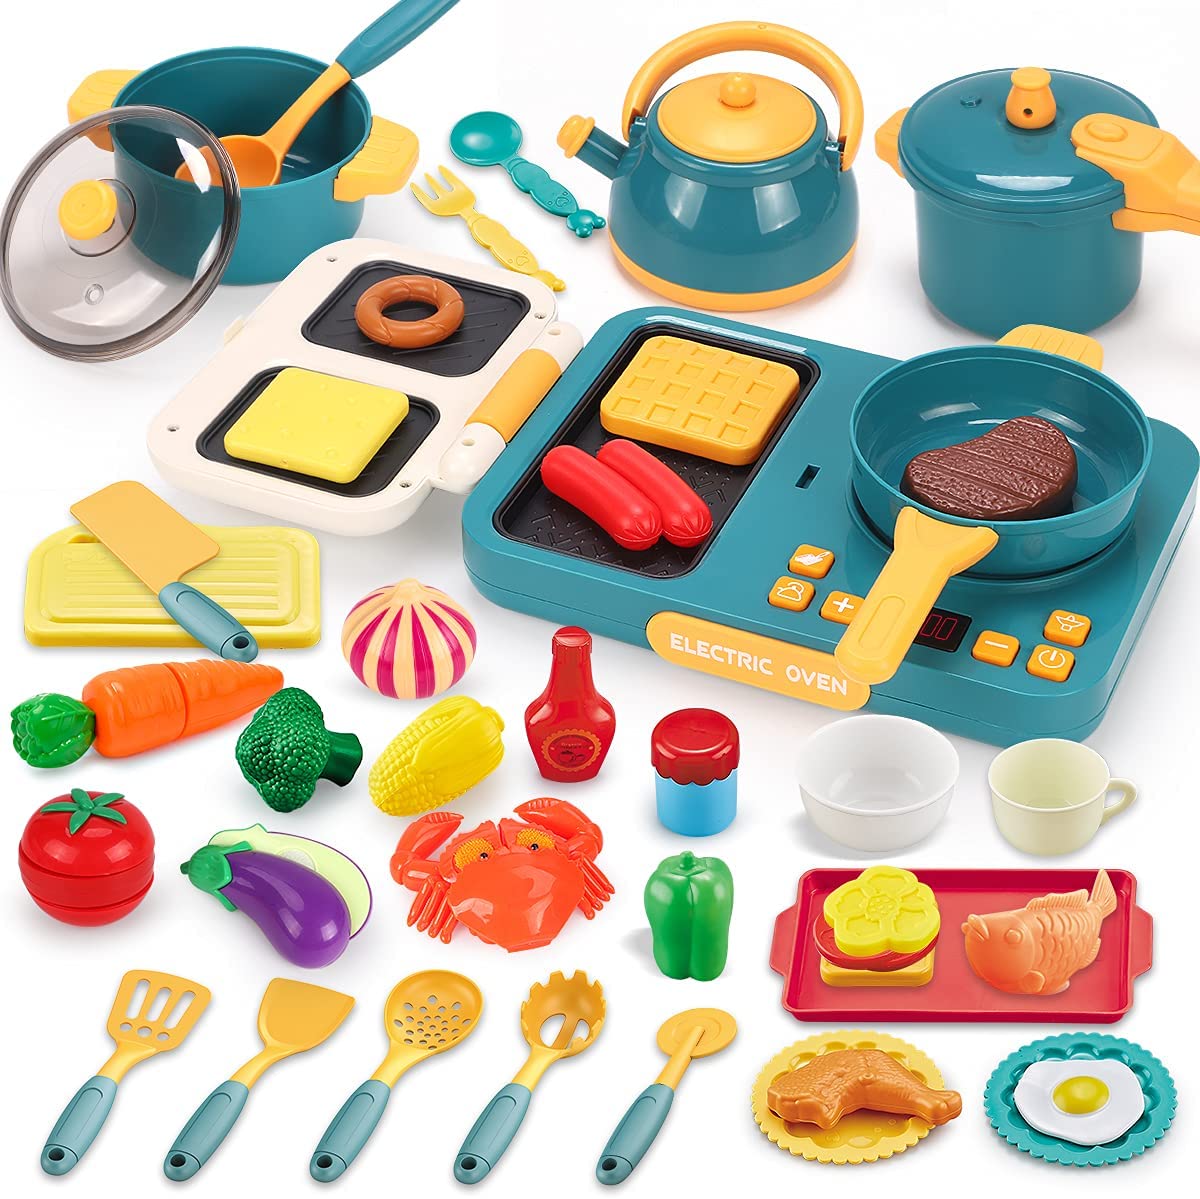 Kids Kitchen Pretend Play Toys Play Cooking Set and Cutting Play Food Toys Gift 